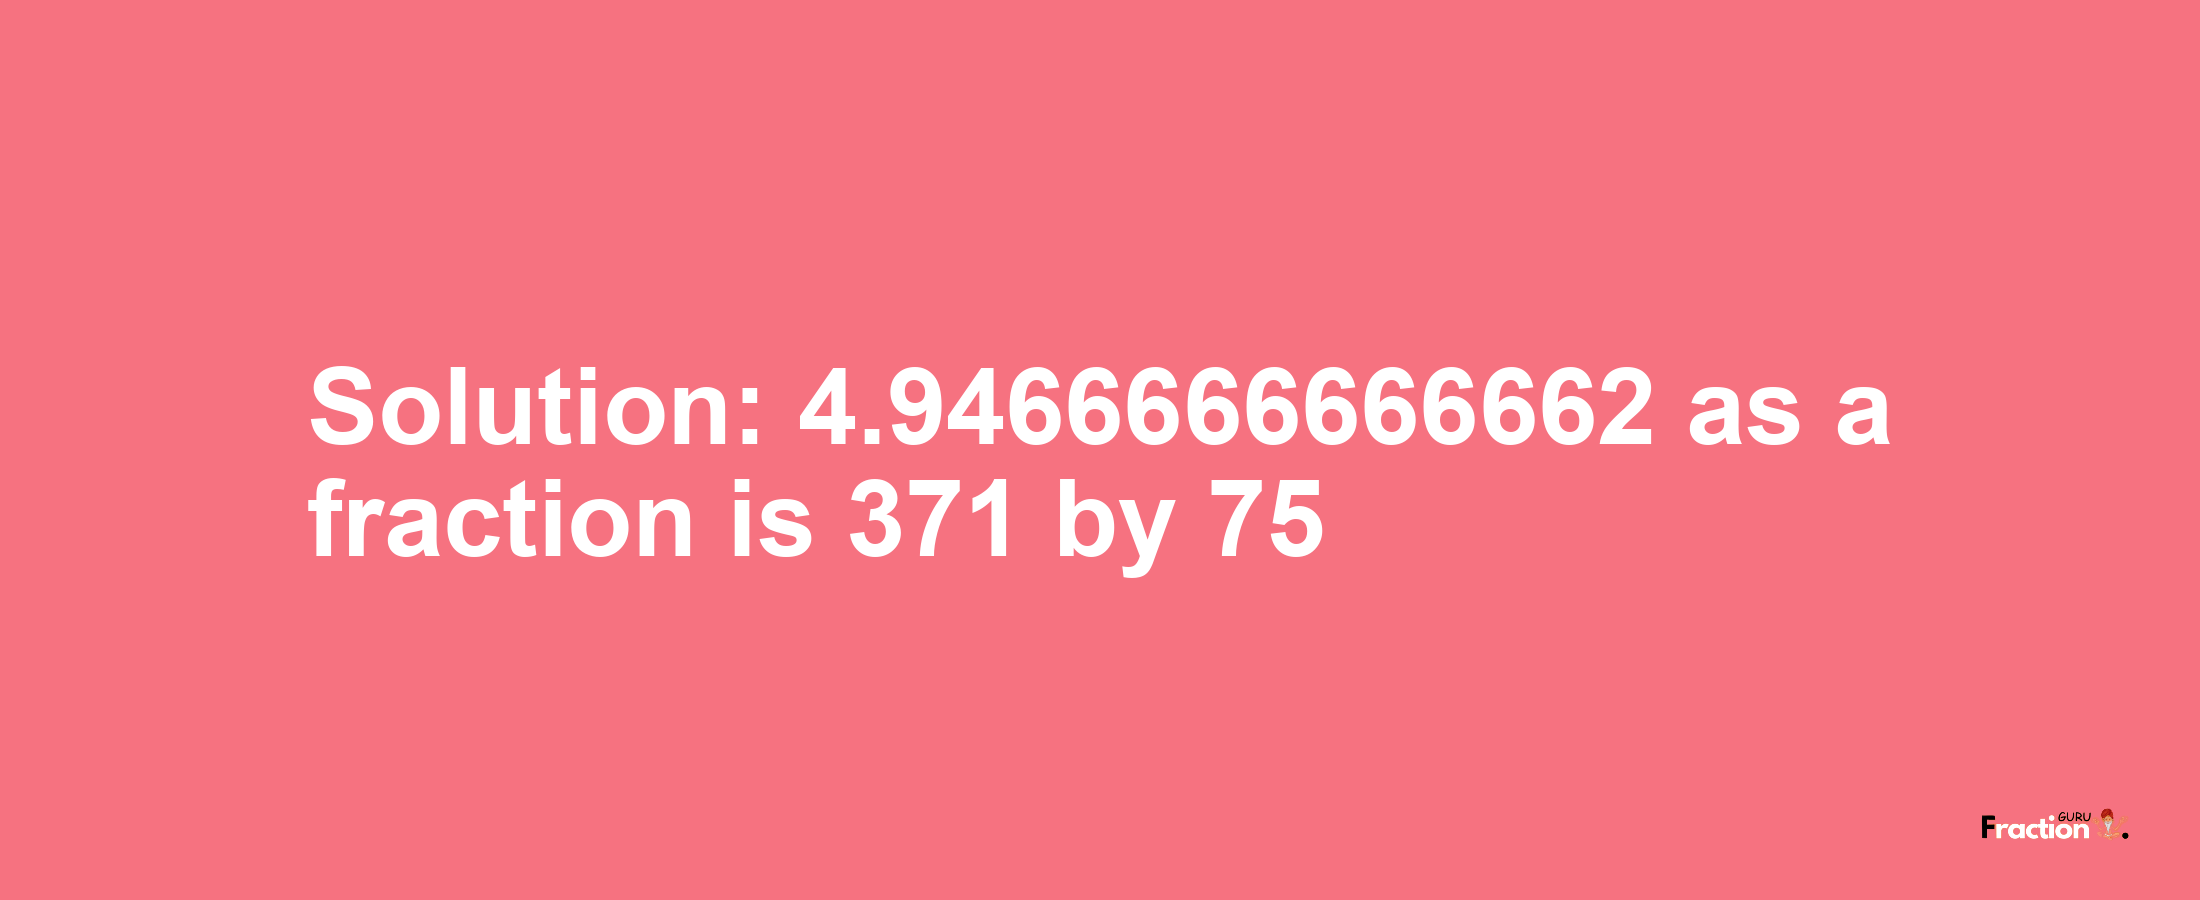 Solution:4.9466666666662 as a fraction is 371/75